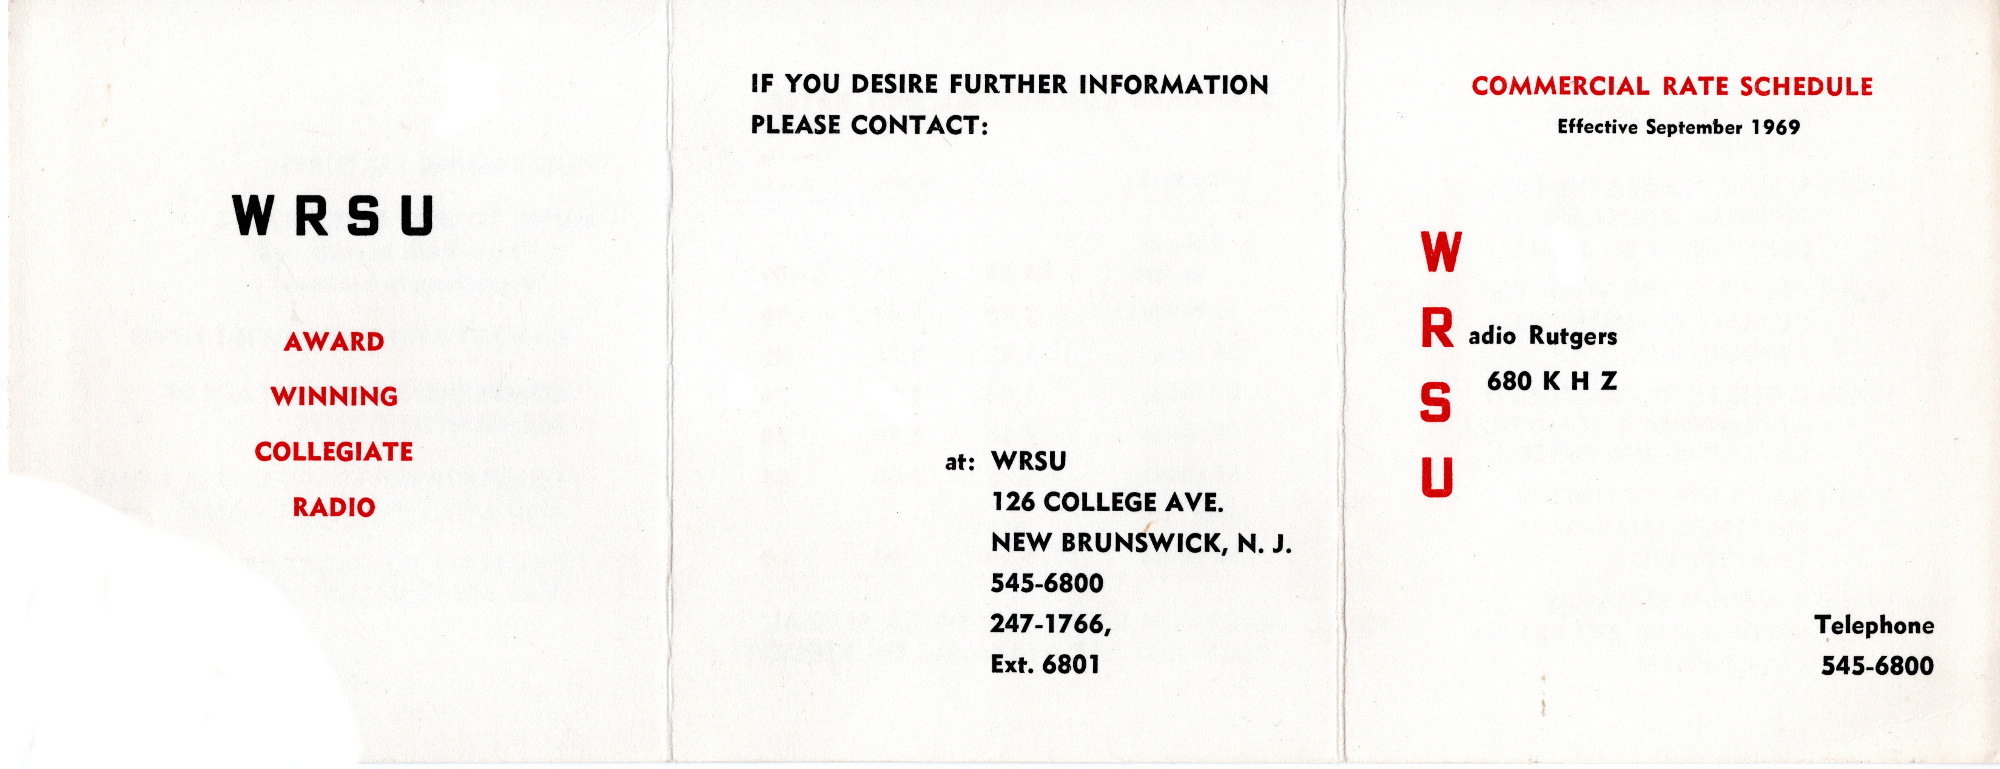 Miniature WRSU 1969 Rate Card - Front - Supplied by Mike Blishak